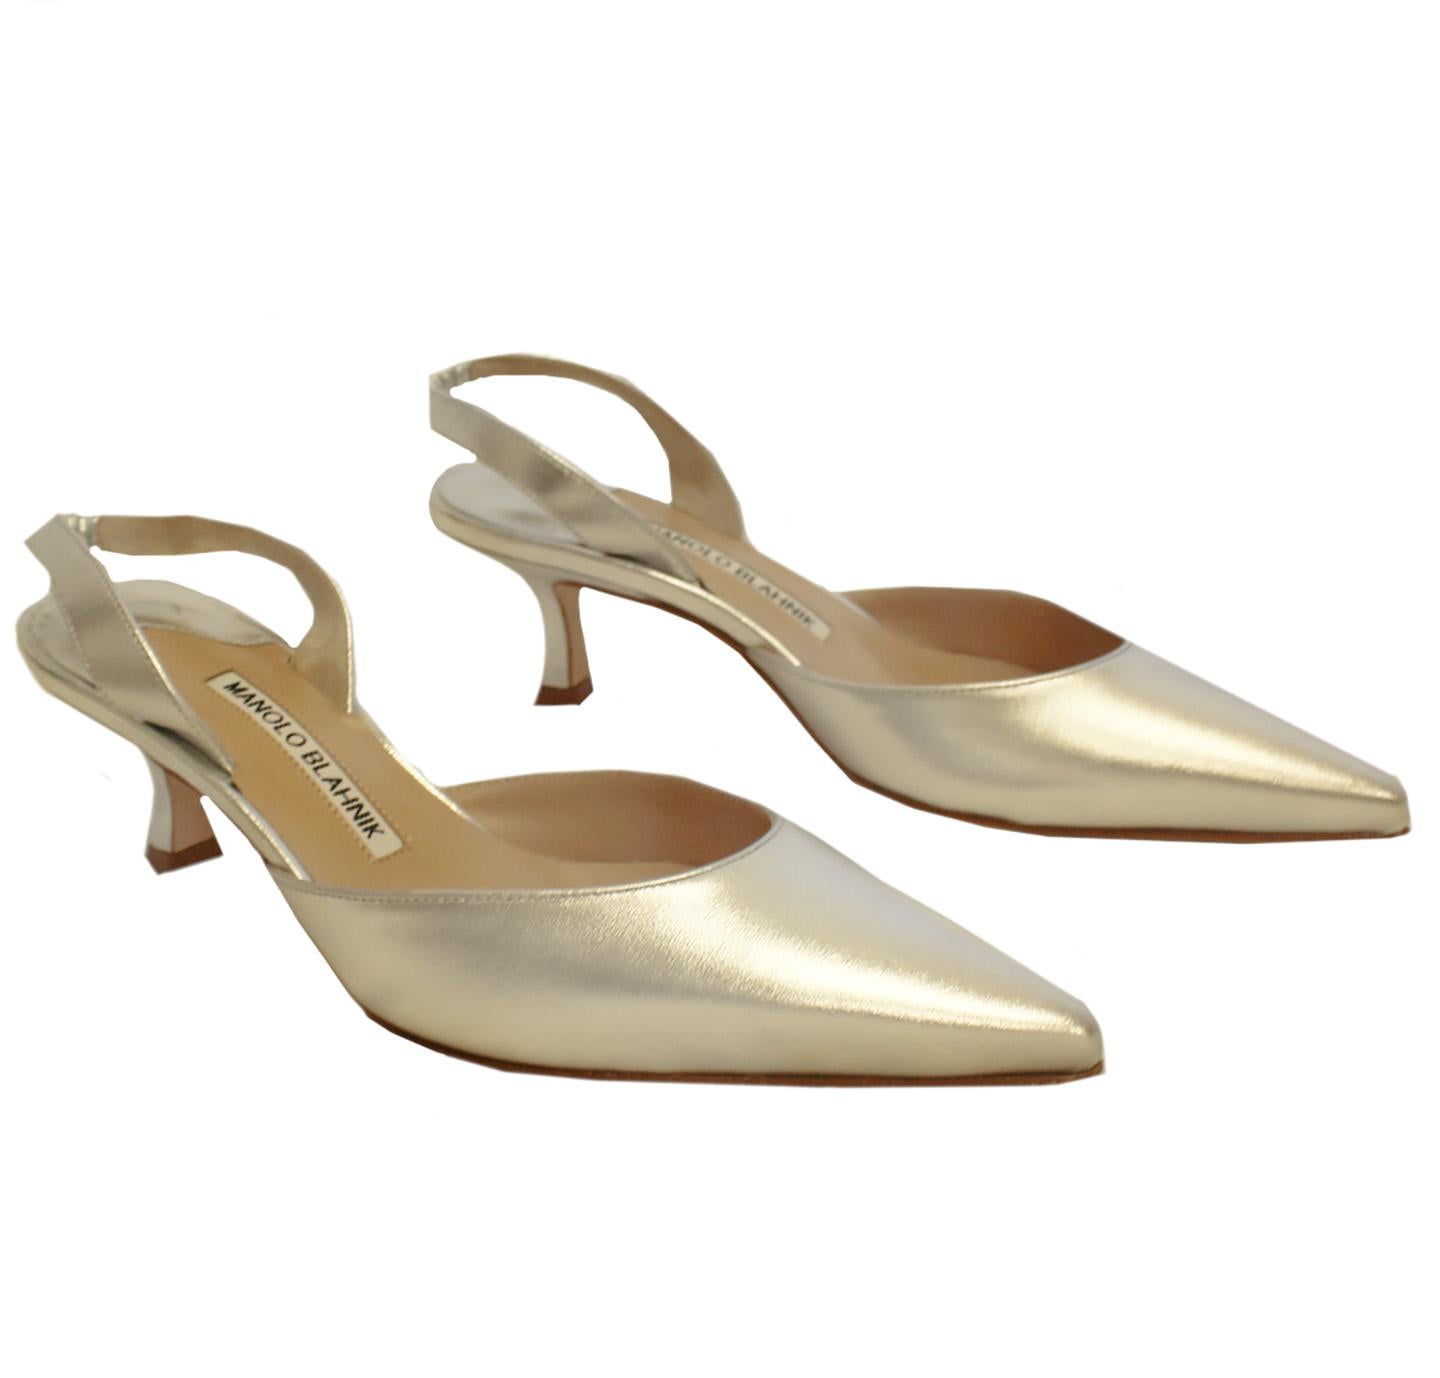 Manolo Blahnik pump in metallic silver tone Carolyne composed of napa leather.  These shoes contain cream leather lining and halter slingback with covered elastic insert.  With 2.8 covered heel and smooth vamp, these Carolyne pumps are one of Manolo